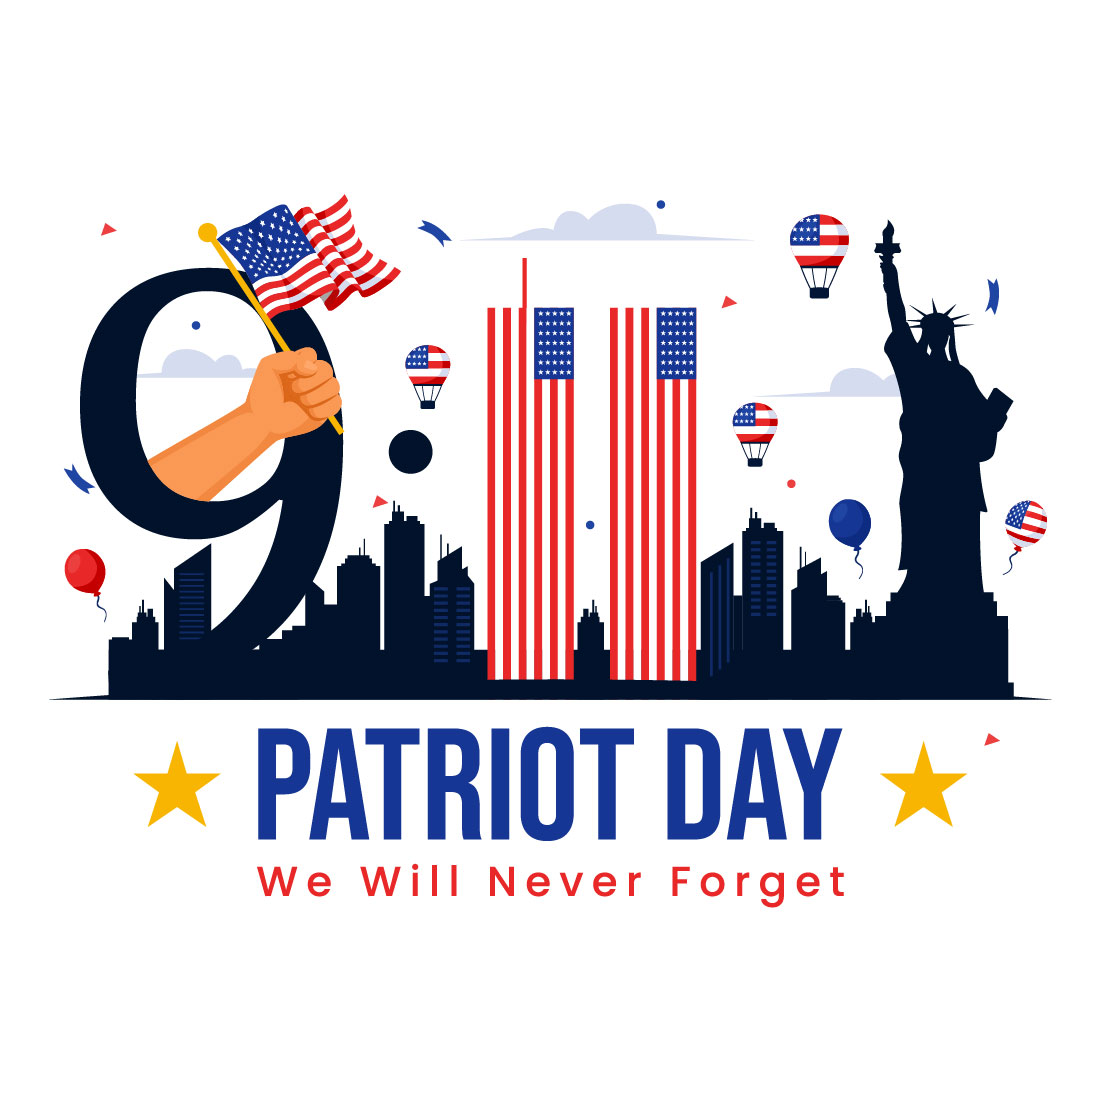 12 USA Patriot Day Illustration cover image.